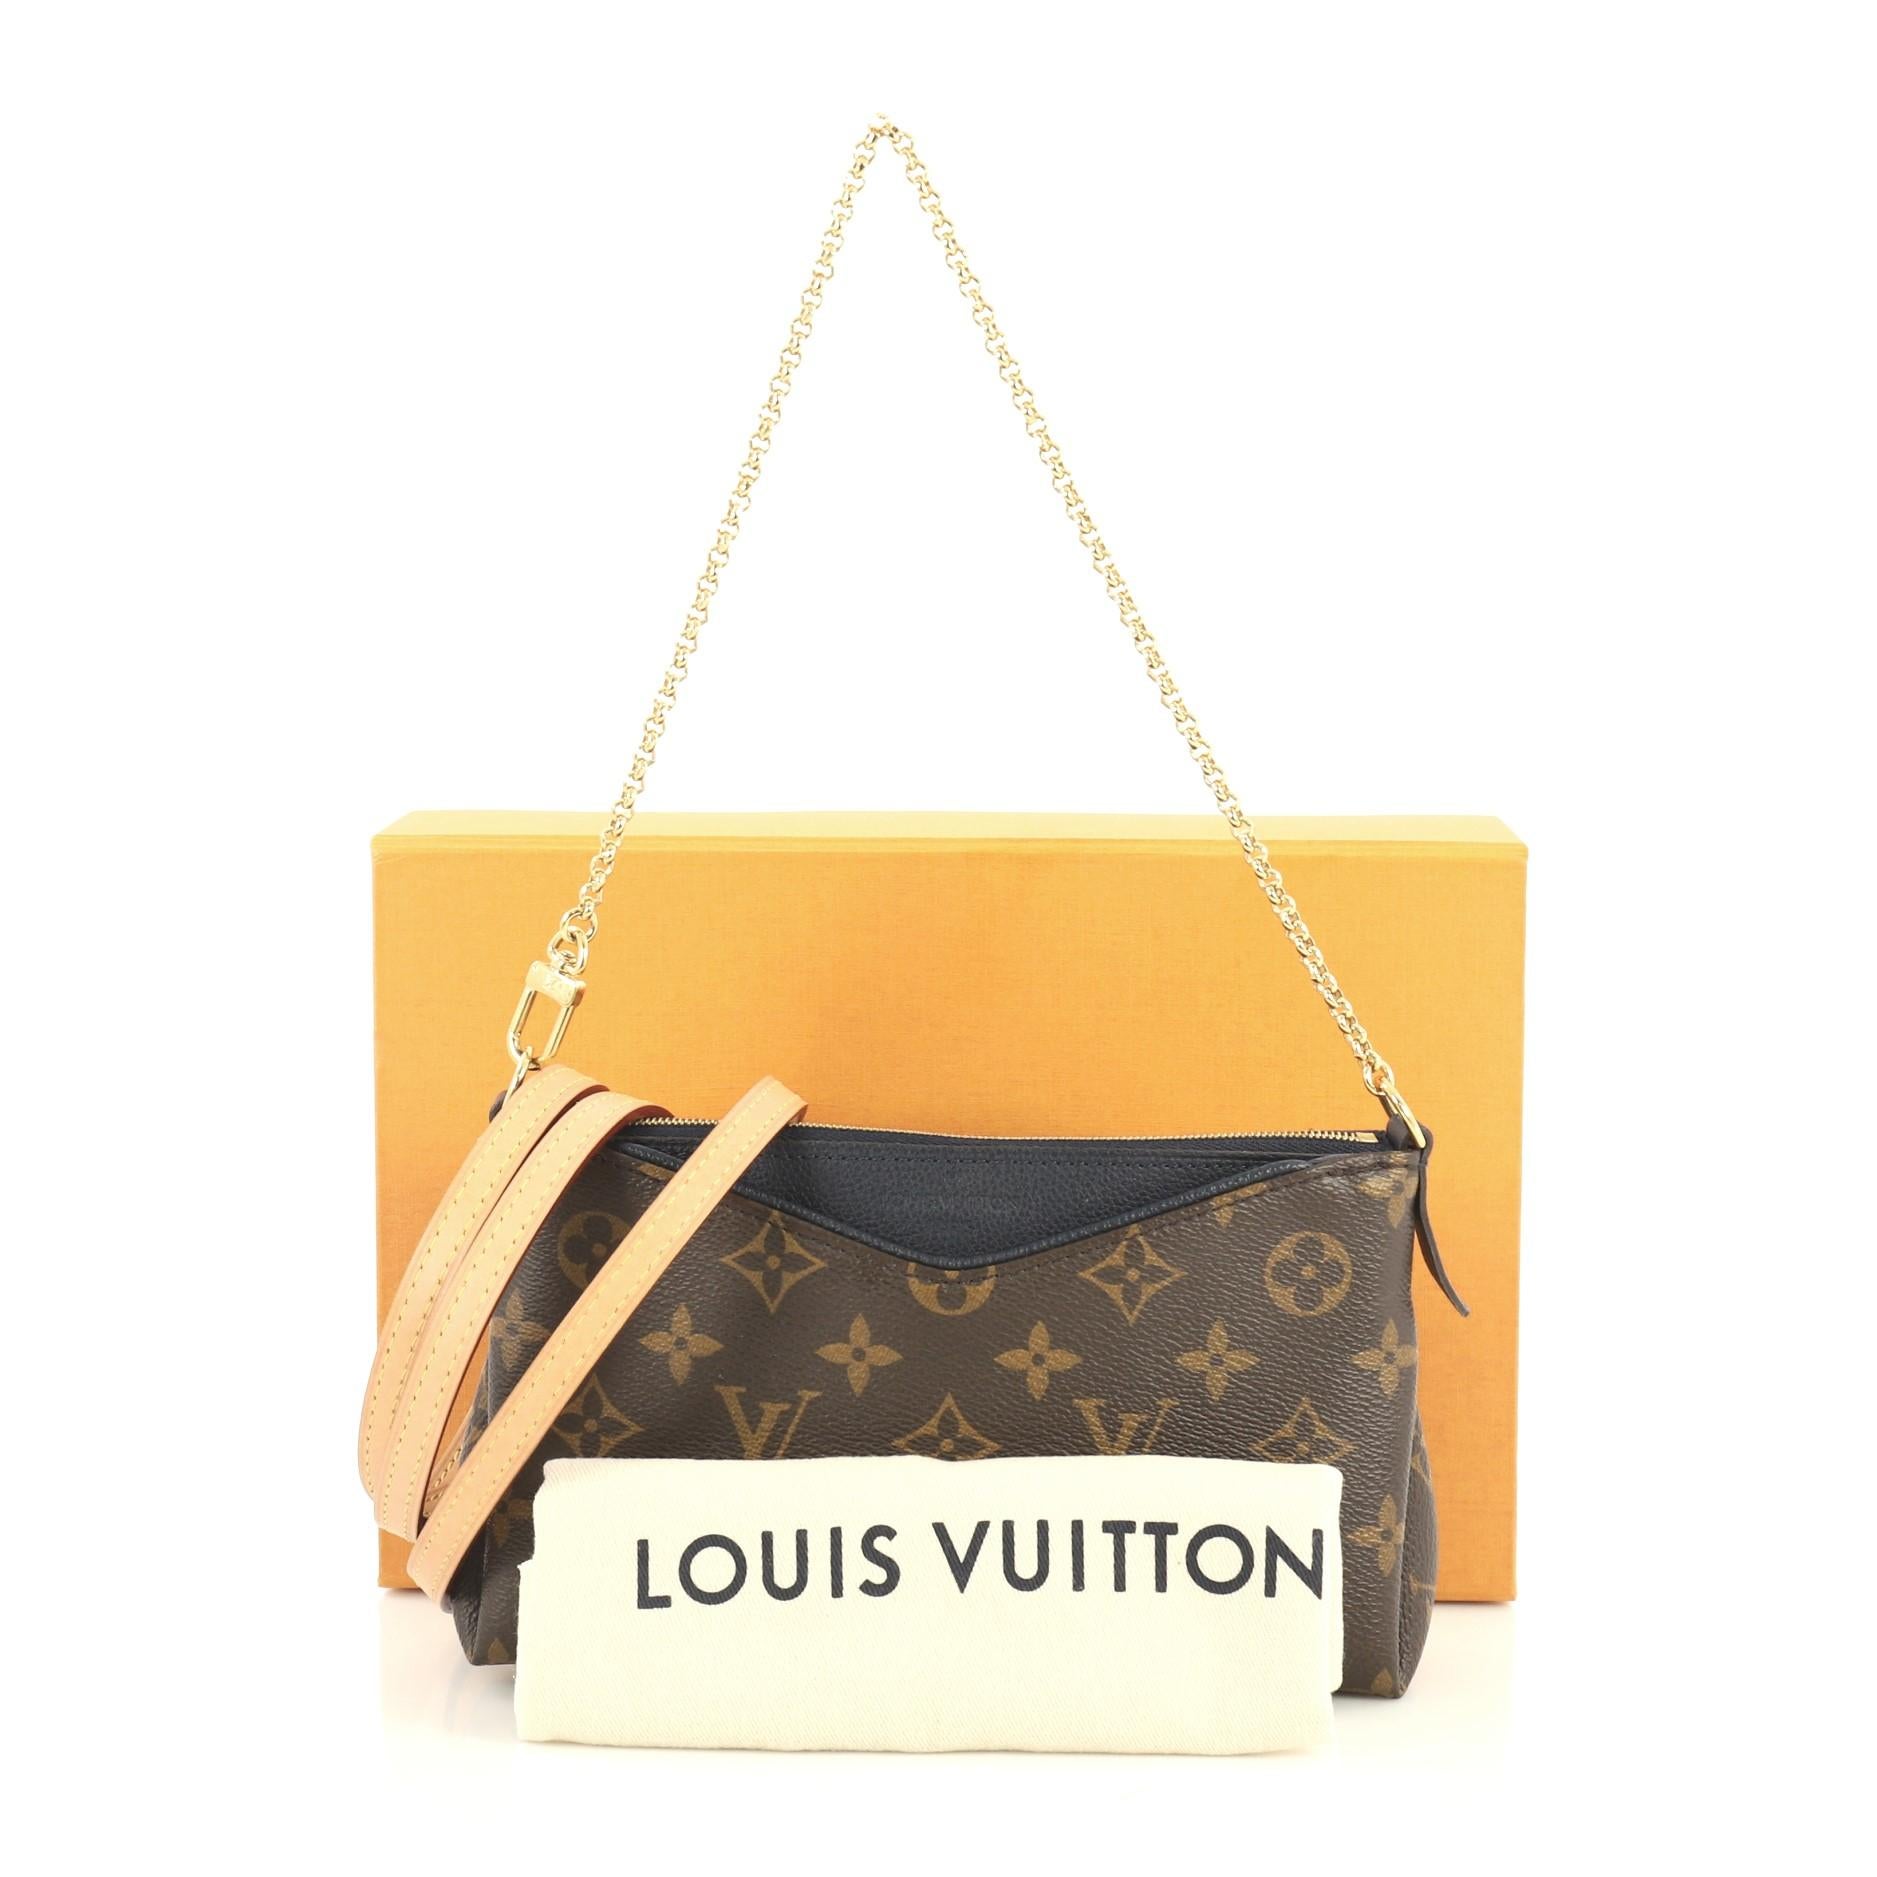 This Louis Vuitton Pallas Clutch Monogram Canvas, crafted from brown monogram coated canvas, features a short chain strap, long leather shoulder strap, exterior front slip pocket, and gold-tone hardware. Its zip closure opens to a blue fabric